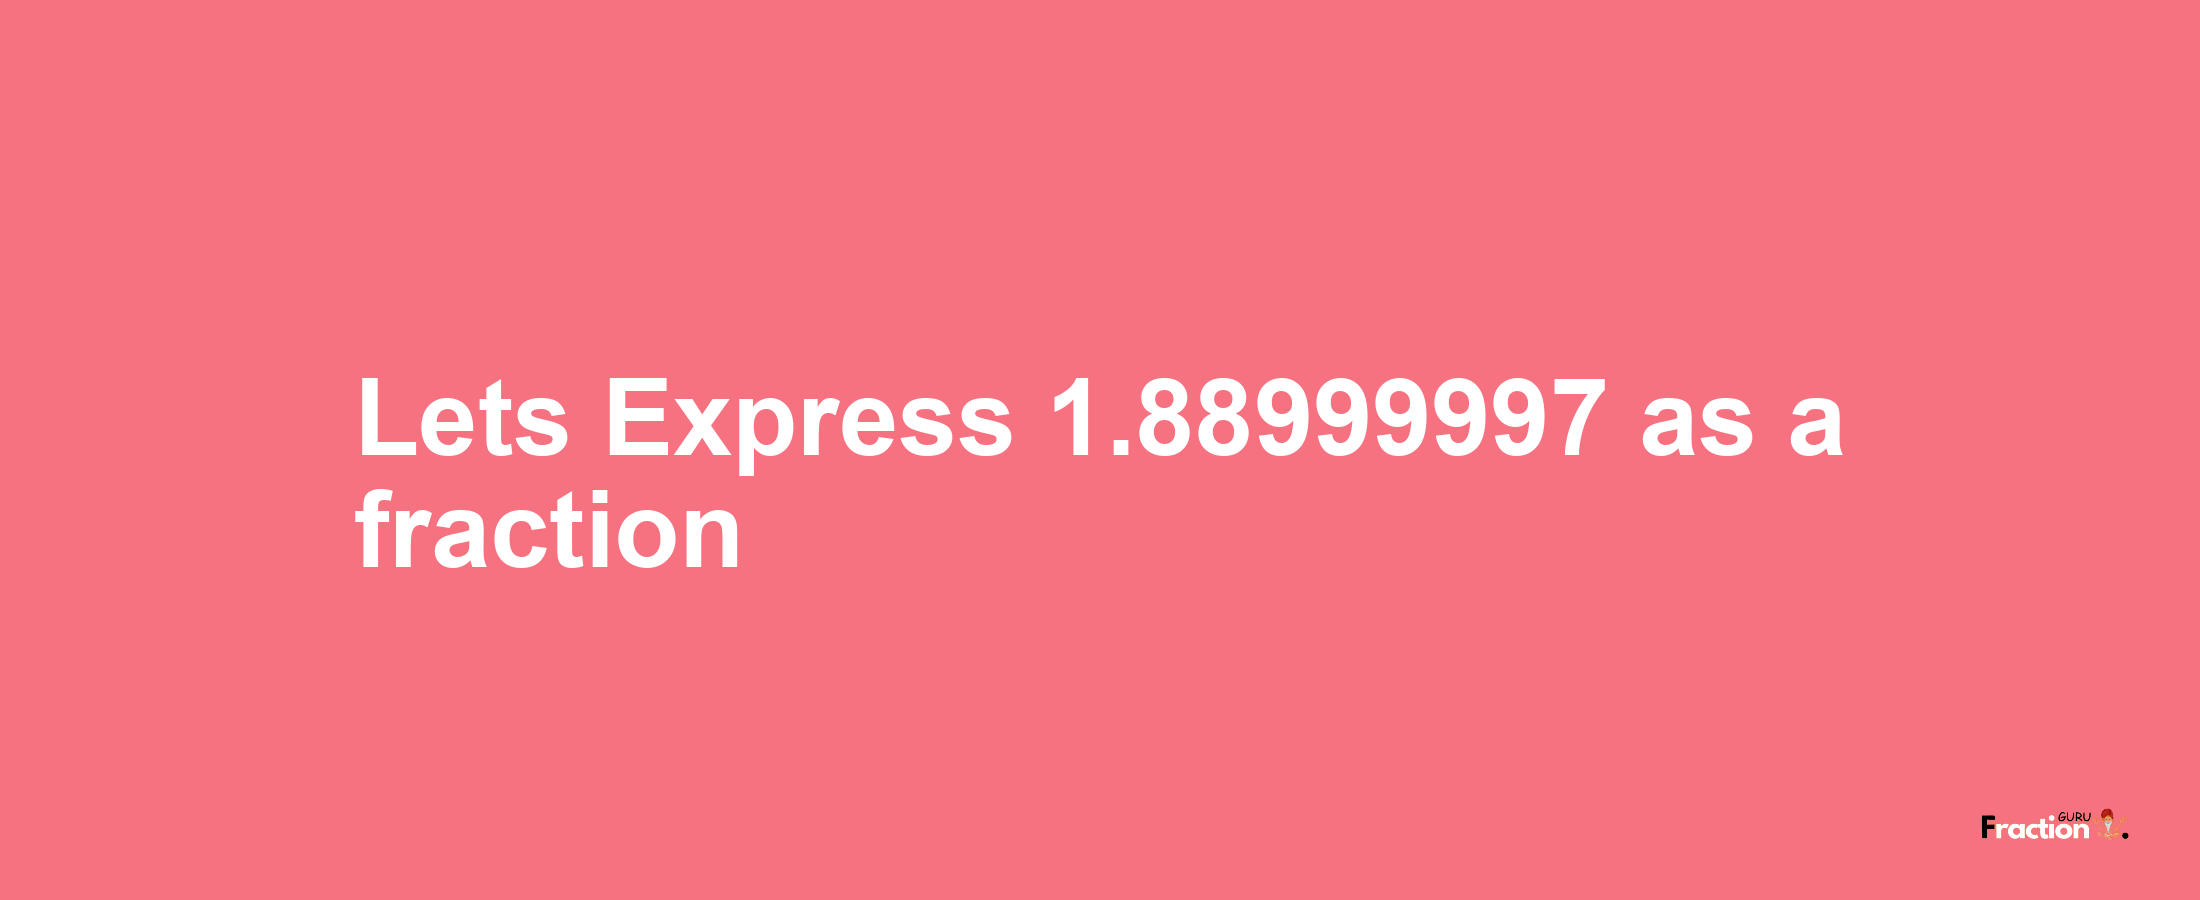 Lets Express 1.88999997 as afraction